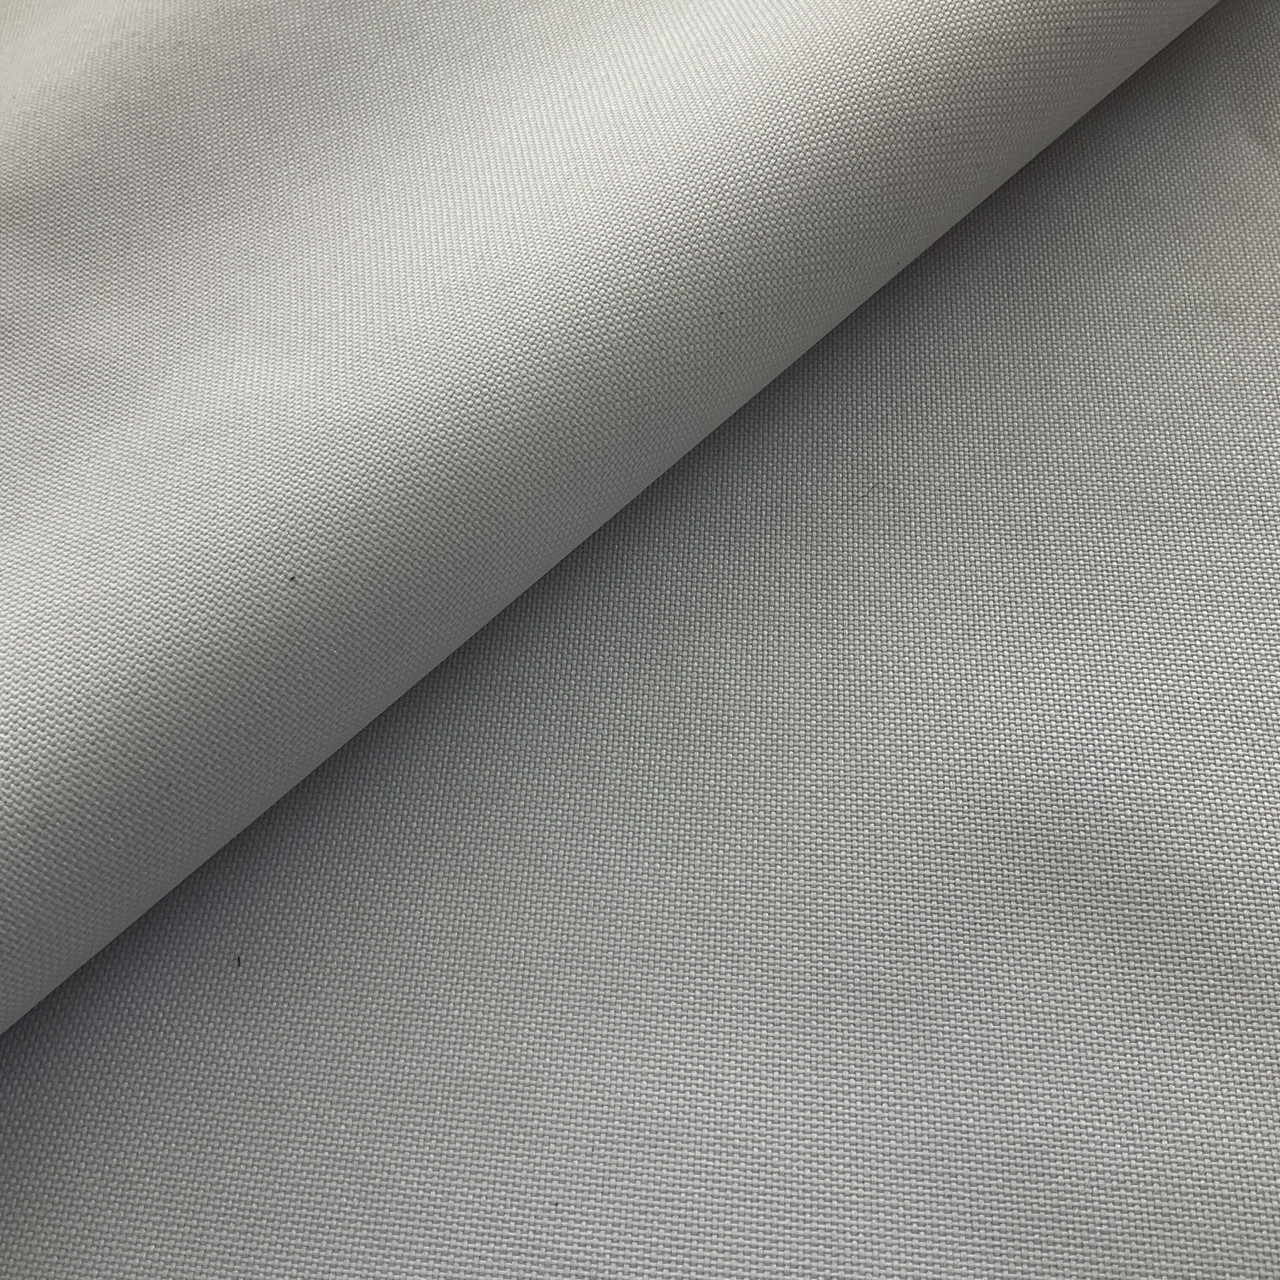 Quilted Polyester Fabric 58/60 Sold By The Yard 2 colors White or black 